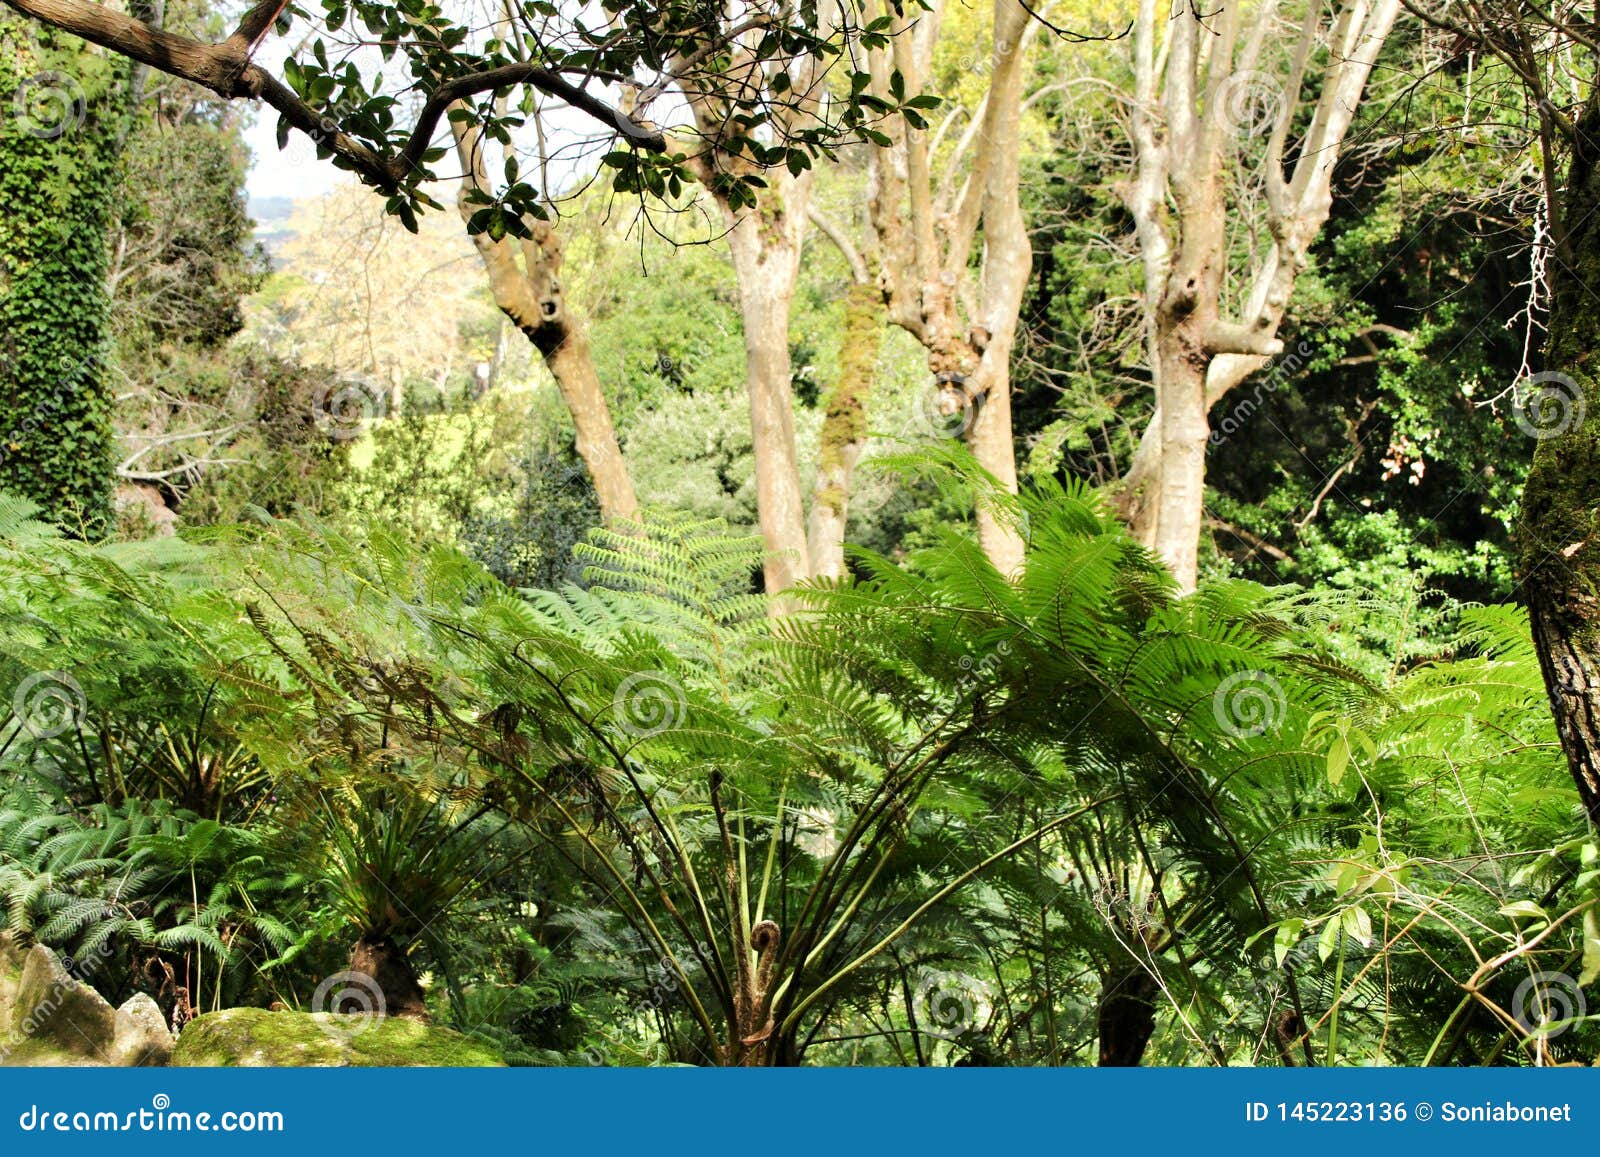 leafy and green garden with big ferns in sintra